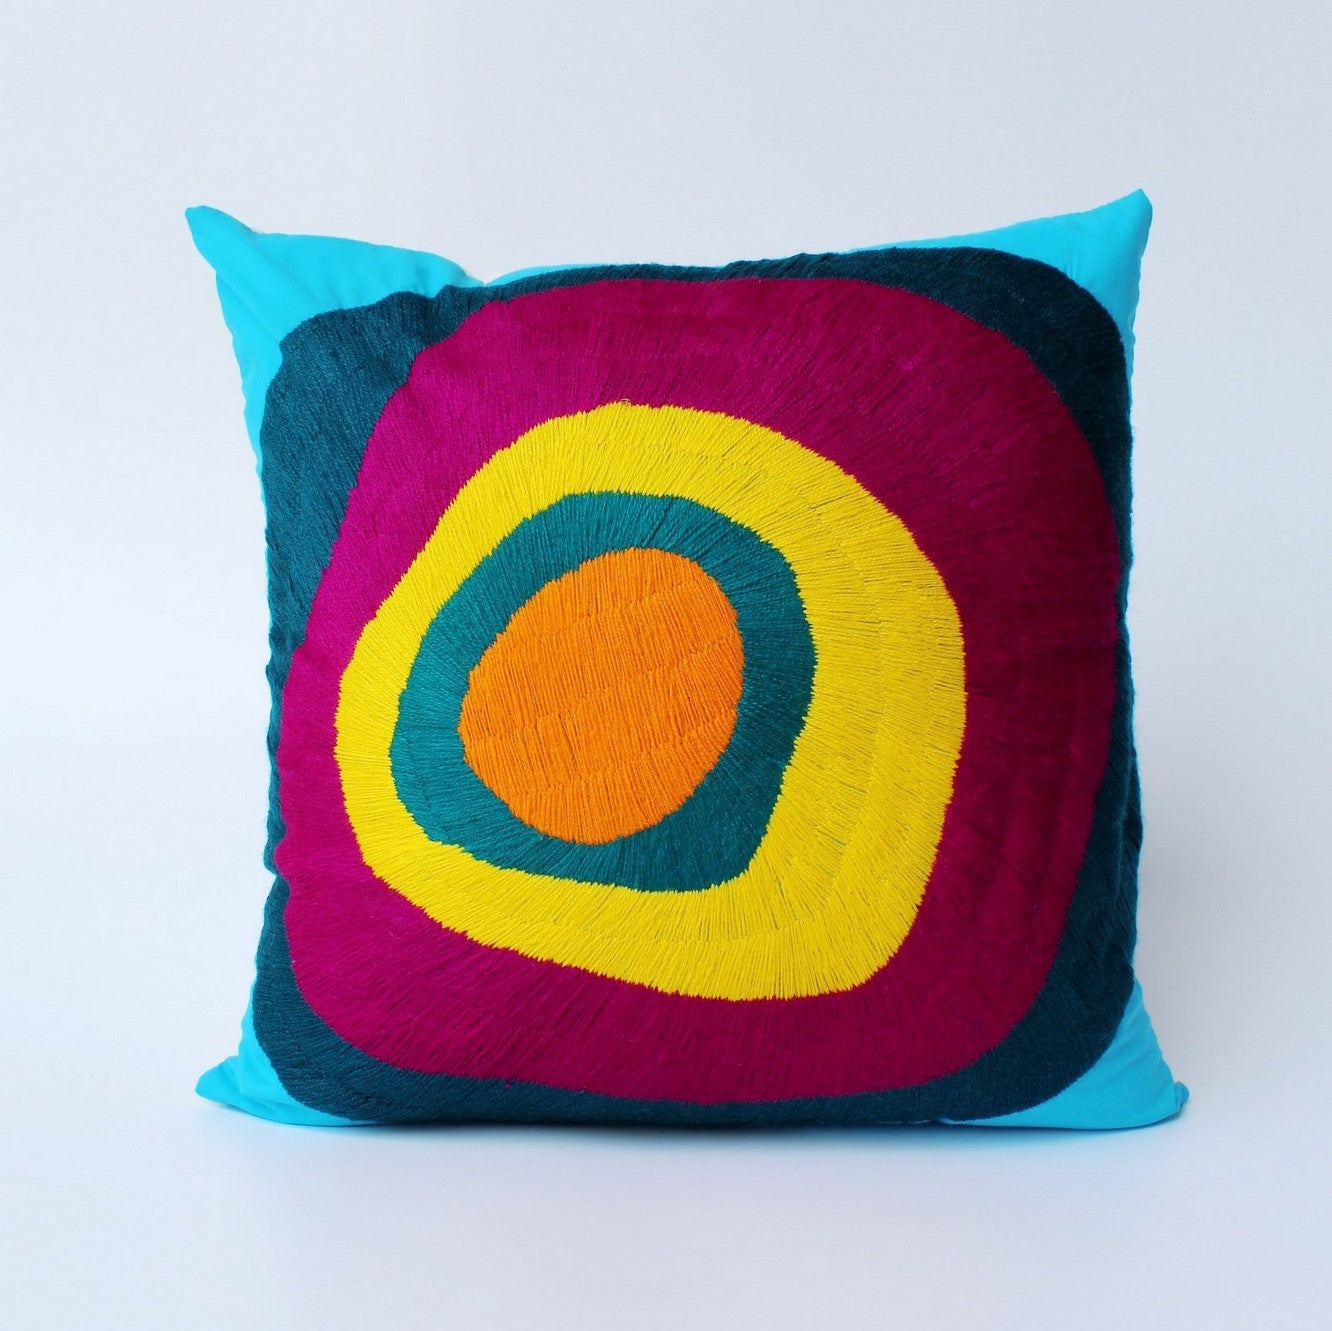 Embroidered pillow cover 16"x16" - Circles TURQUOISE